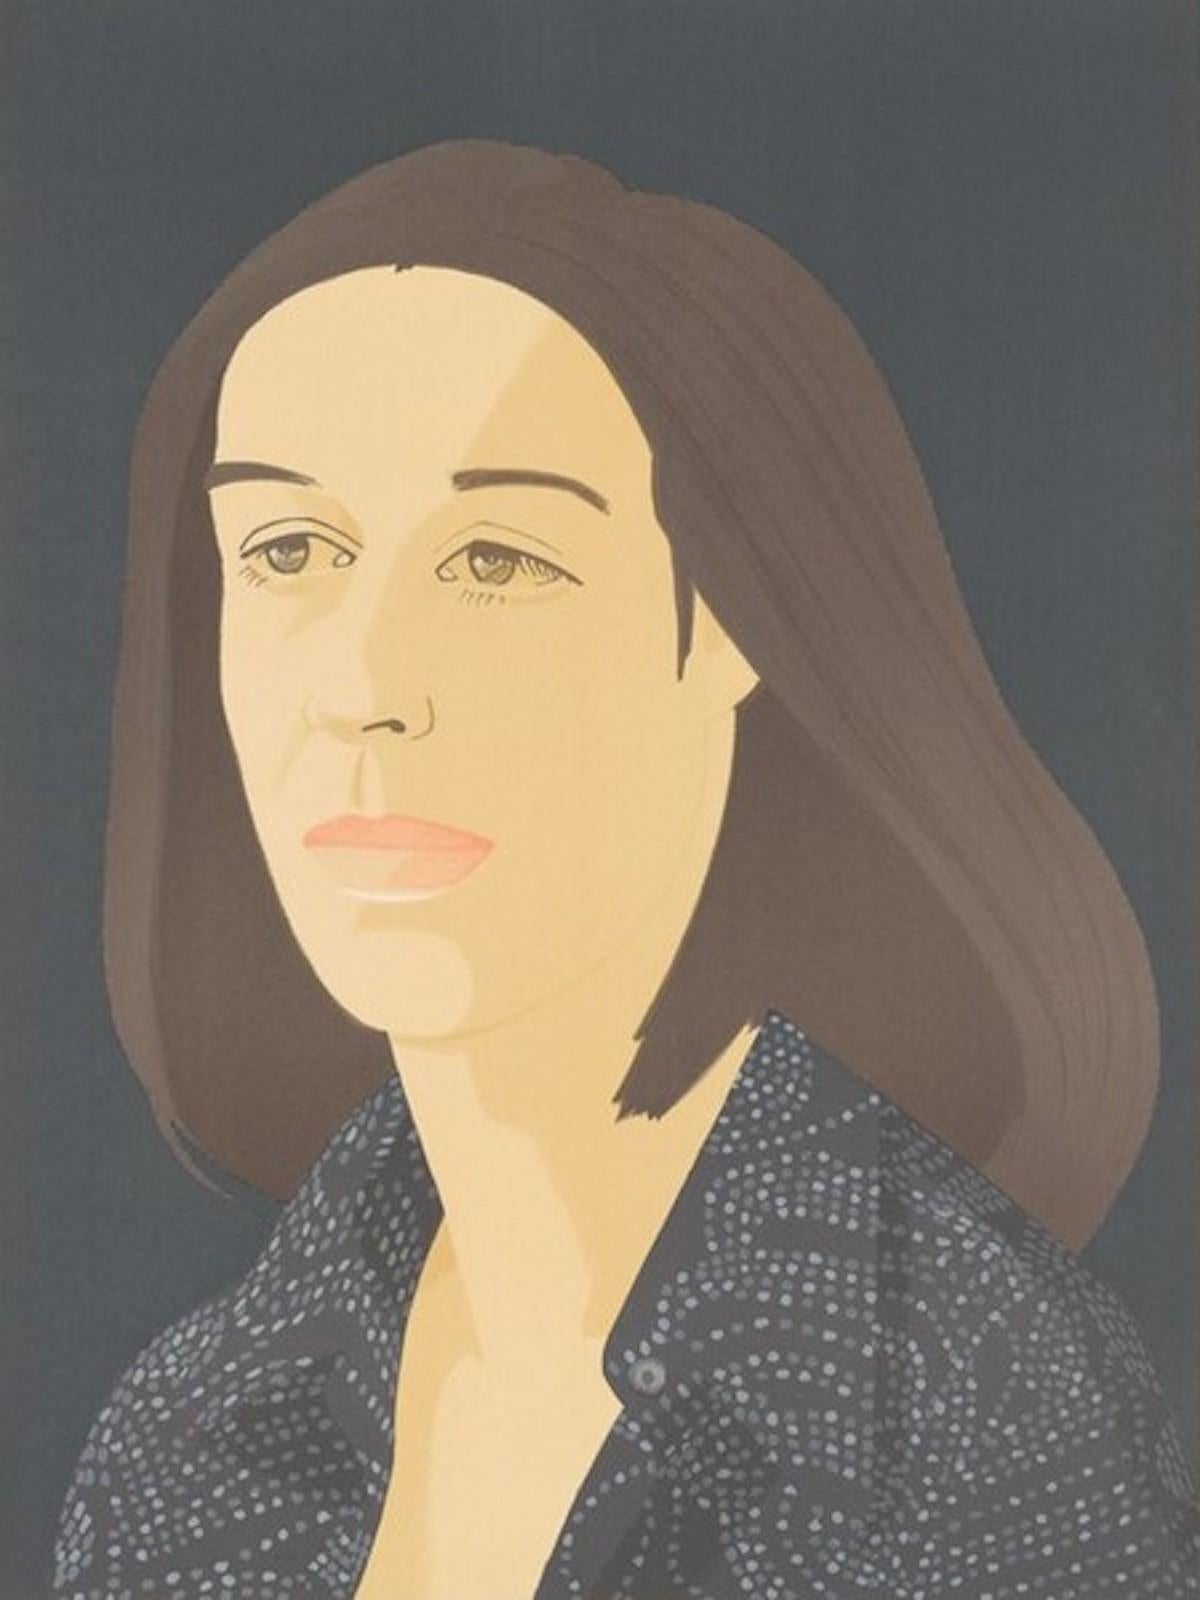 ALEX KATZ (1927-Present)

Alex Katz 'Ada Four Times 3' is a screenprint and lithograph printed in colors on Arches wove paper, printed by Styria Studio, Inc., published by GHJ Graphics, Inc., New York. It comes from an edition size of 125, conceived